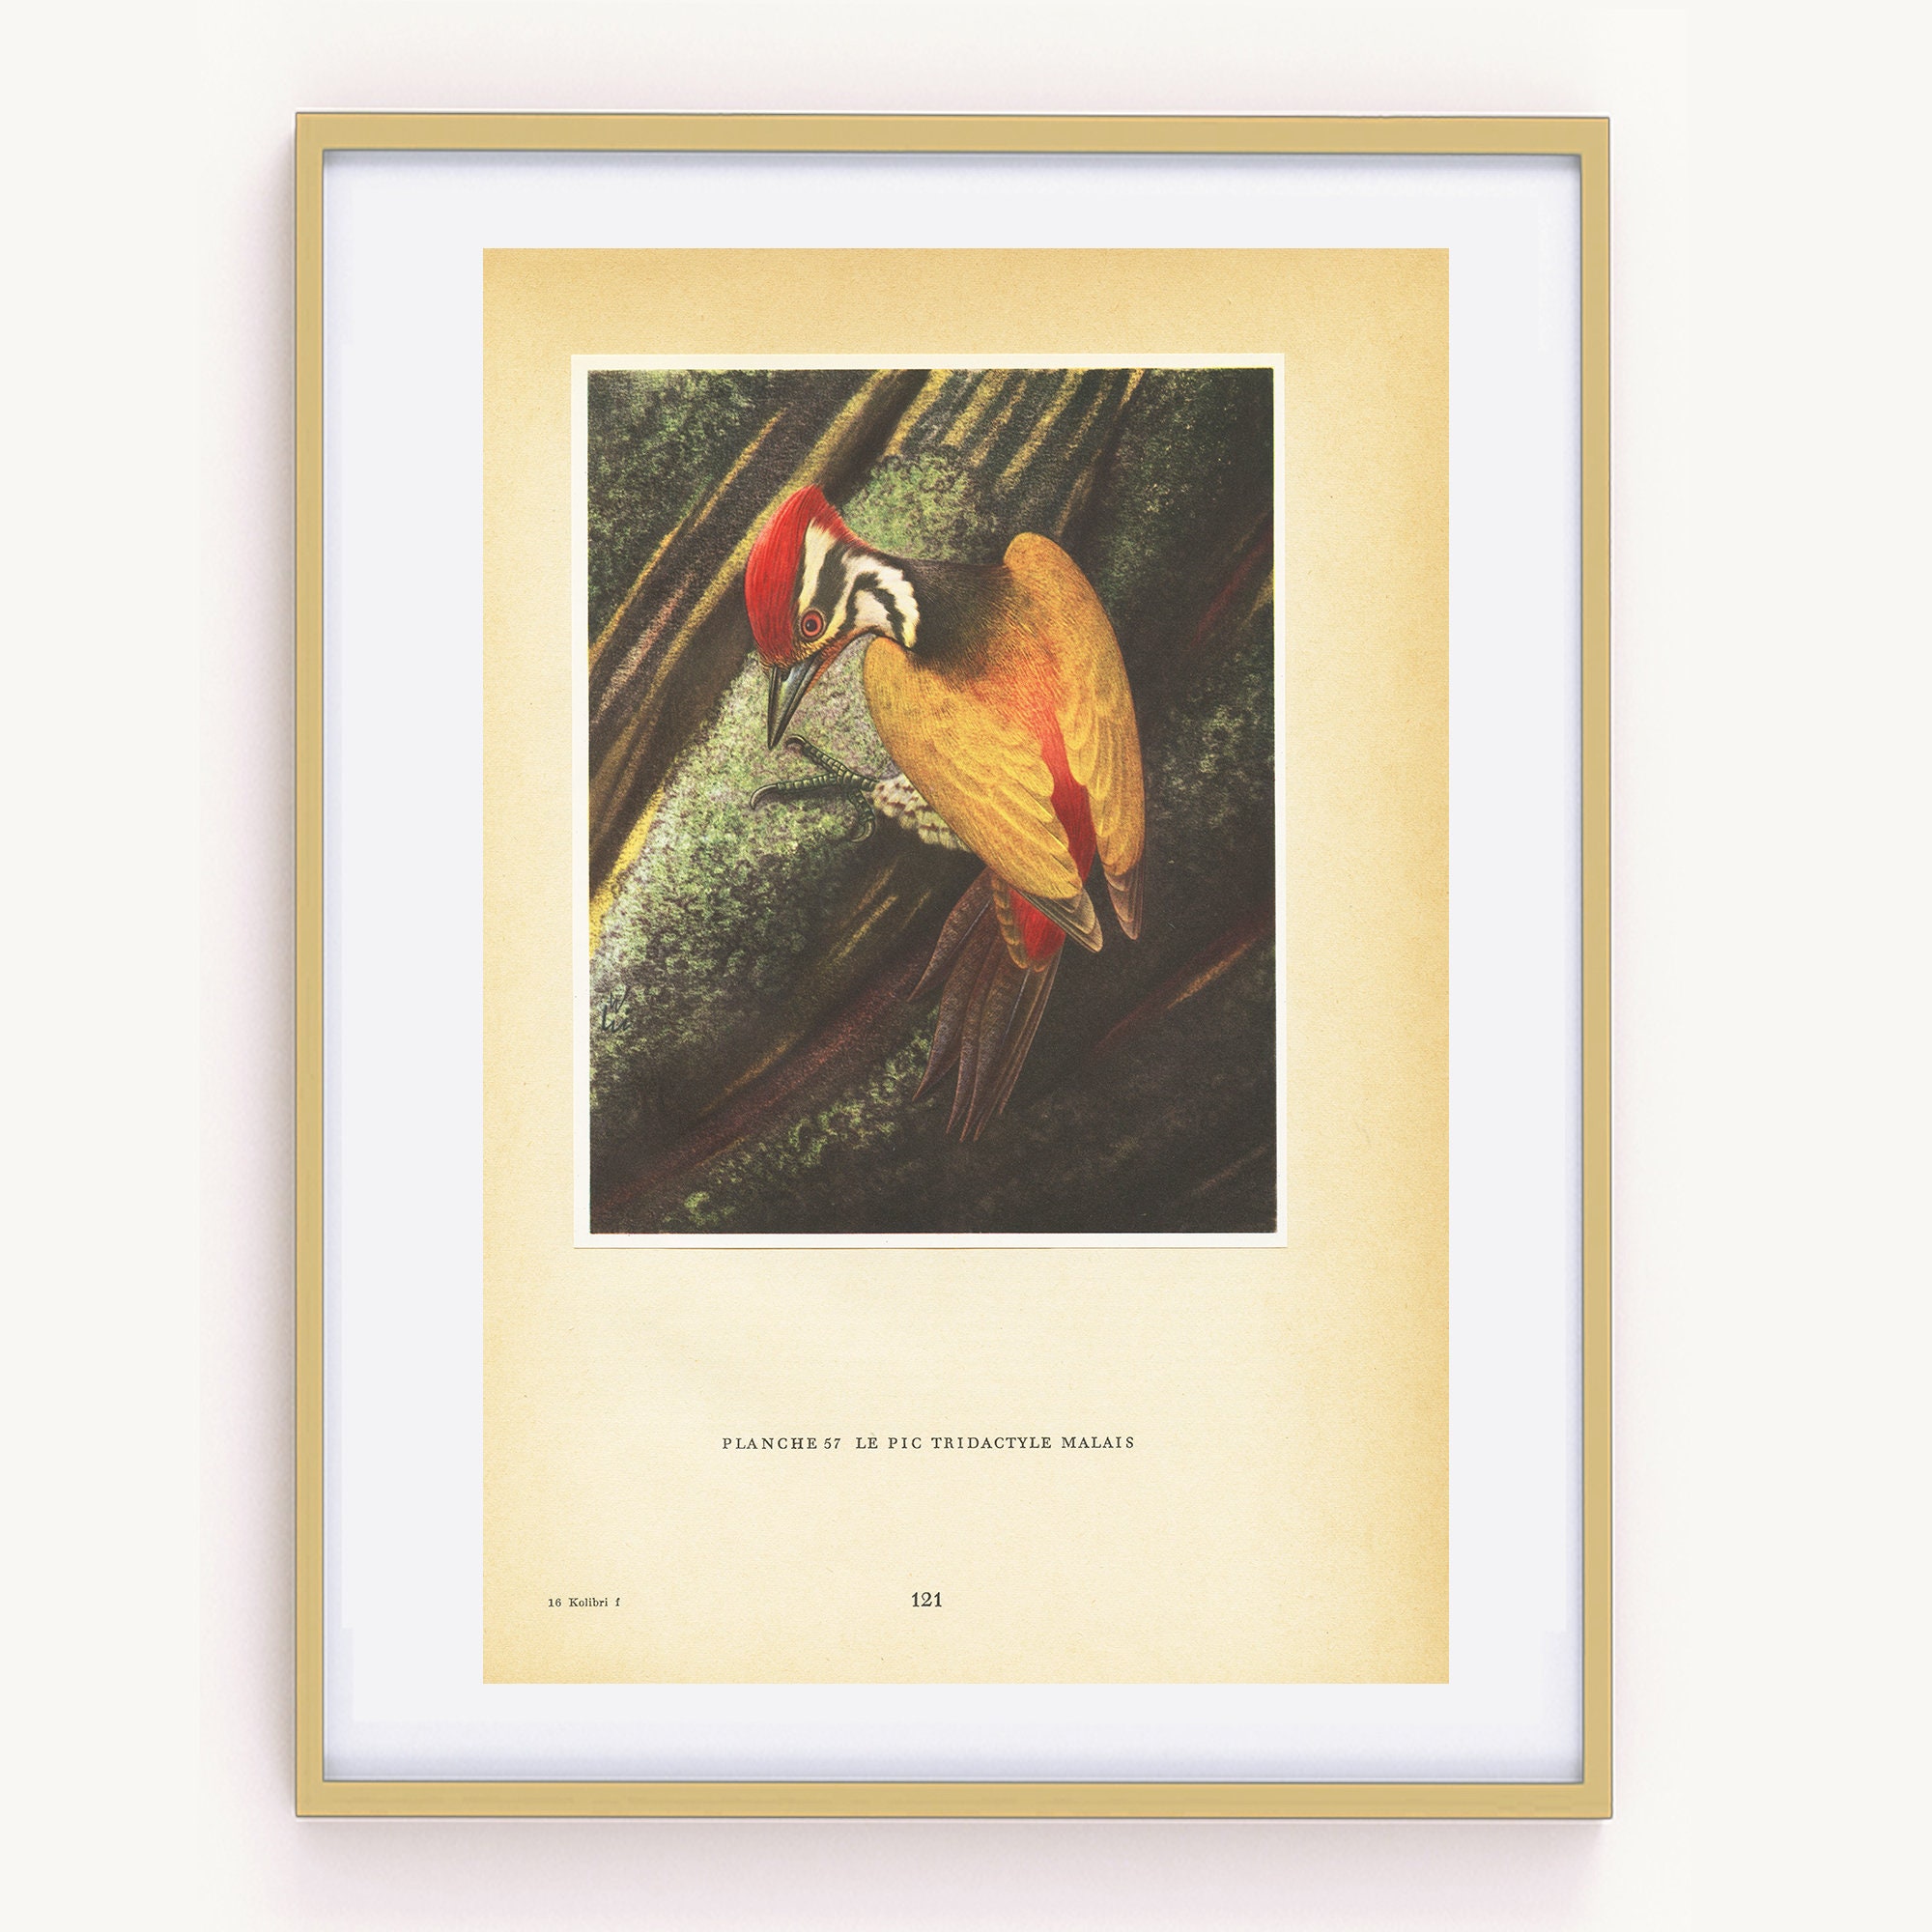 "Petite Affiche Vintage: Illustration de Pic Tridactyle Malais, Oiseaux Tropicaux, Décoration Avianes, Cadeau Ornithologique Dinopium" or "Vintage Bird Illustration: The Malayan Tridactyl Pic, Tropical Birds Decor, Ornithologist Gift - Dinopium" could be alternative titles for the blog post. Both titles are in French and English, keeping the original focus on the vintage illustration of the Malayan Pic, the tropical birds decor theme, and the ornithologist gift aspect.